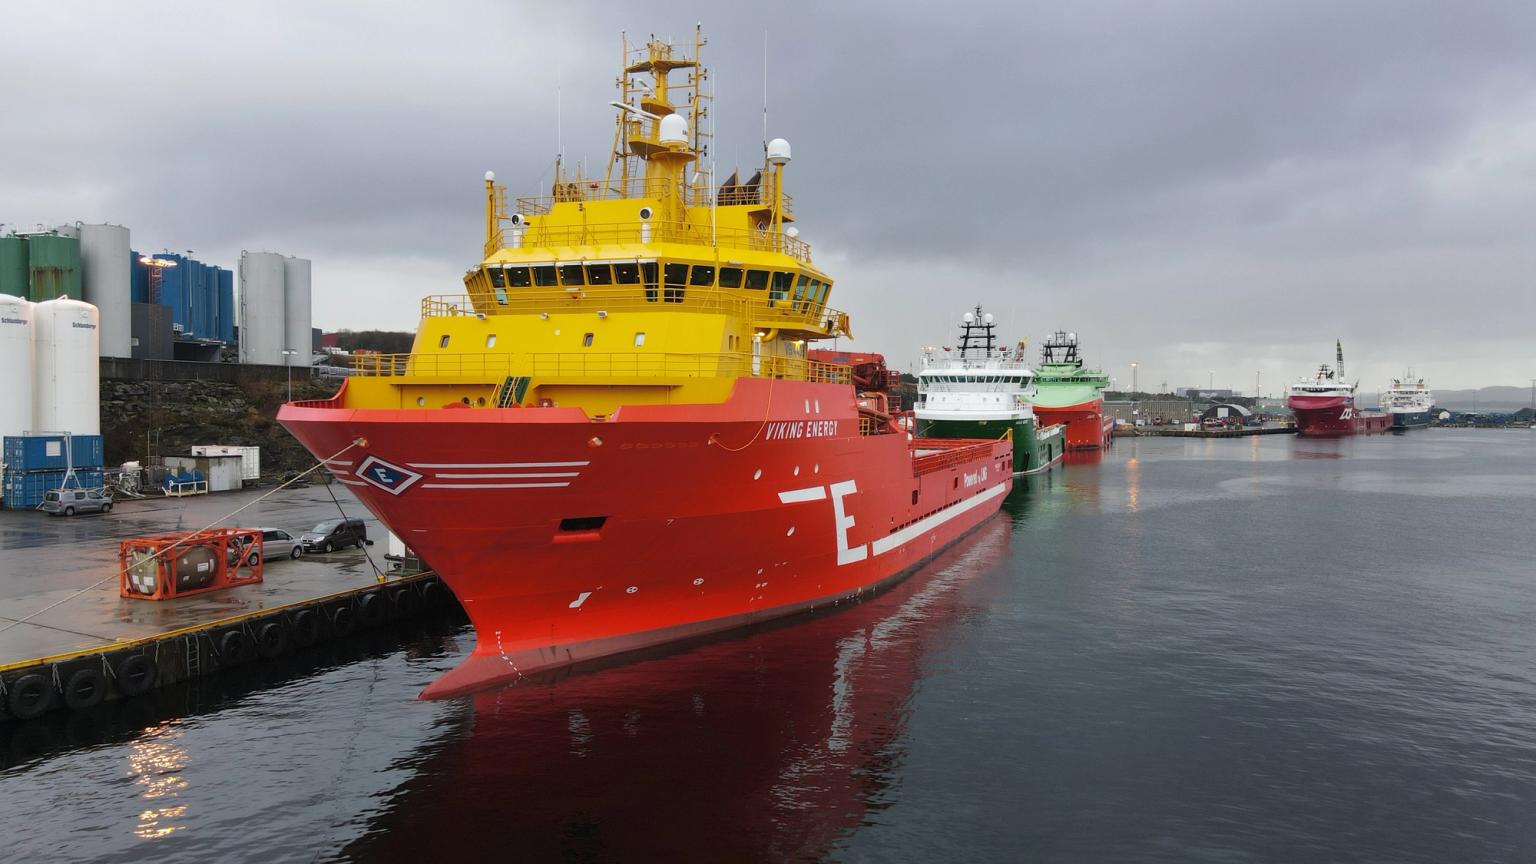 In the ShipFC project the offshore support vessel Viking Energy will be retrofitted with a 2 MW ammonia fuel cell system